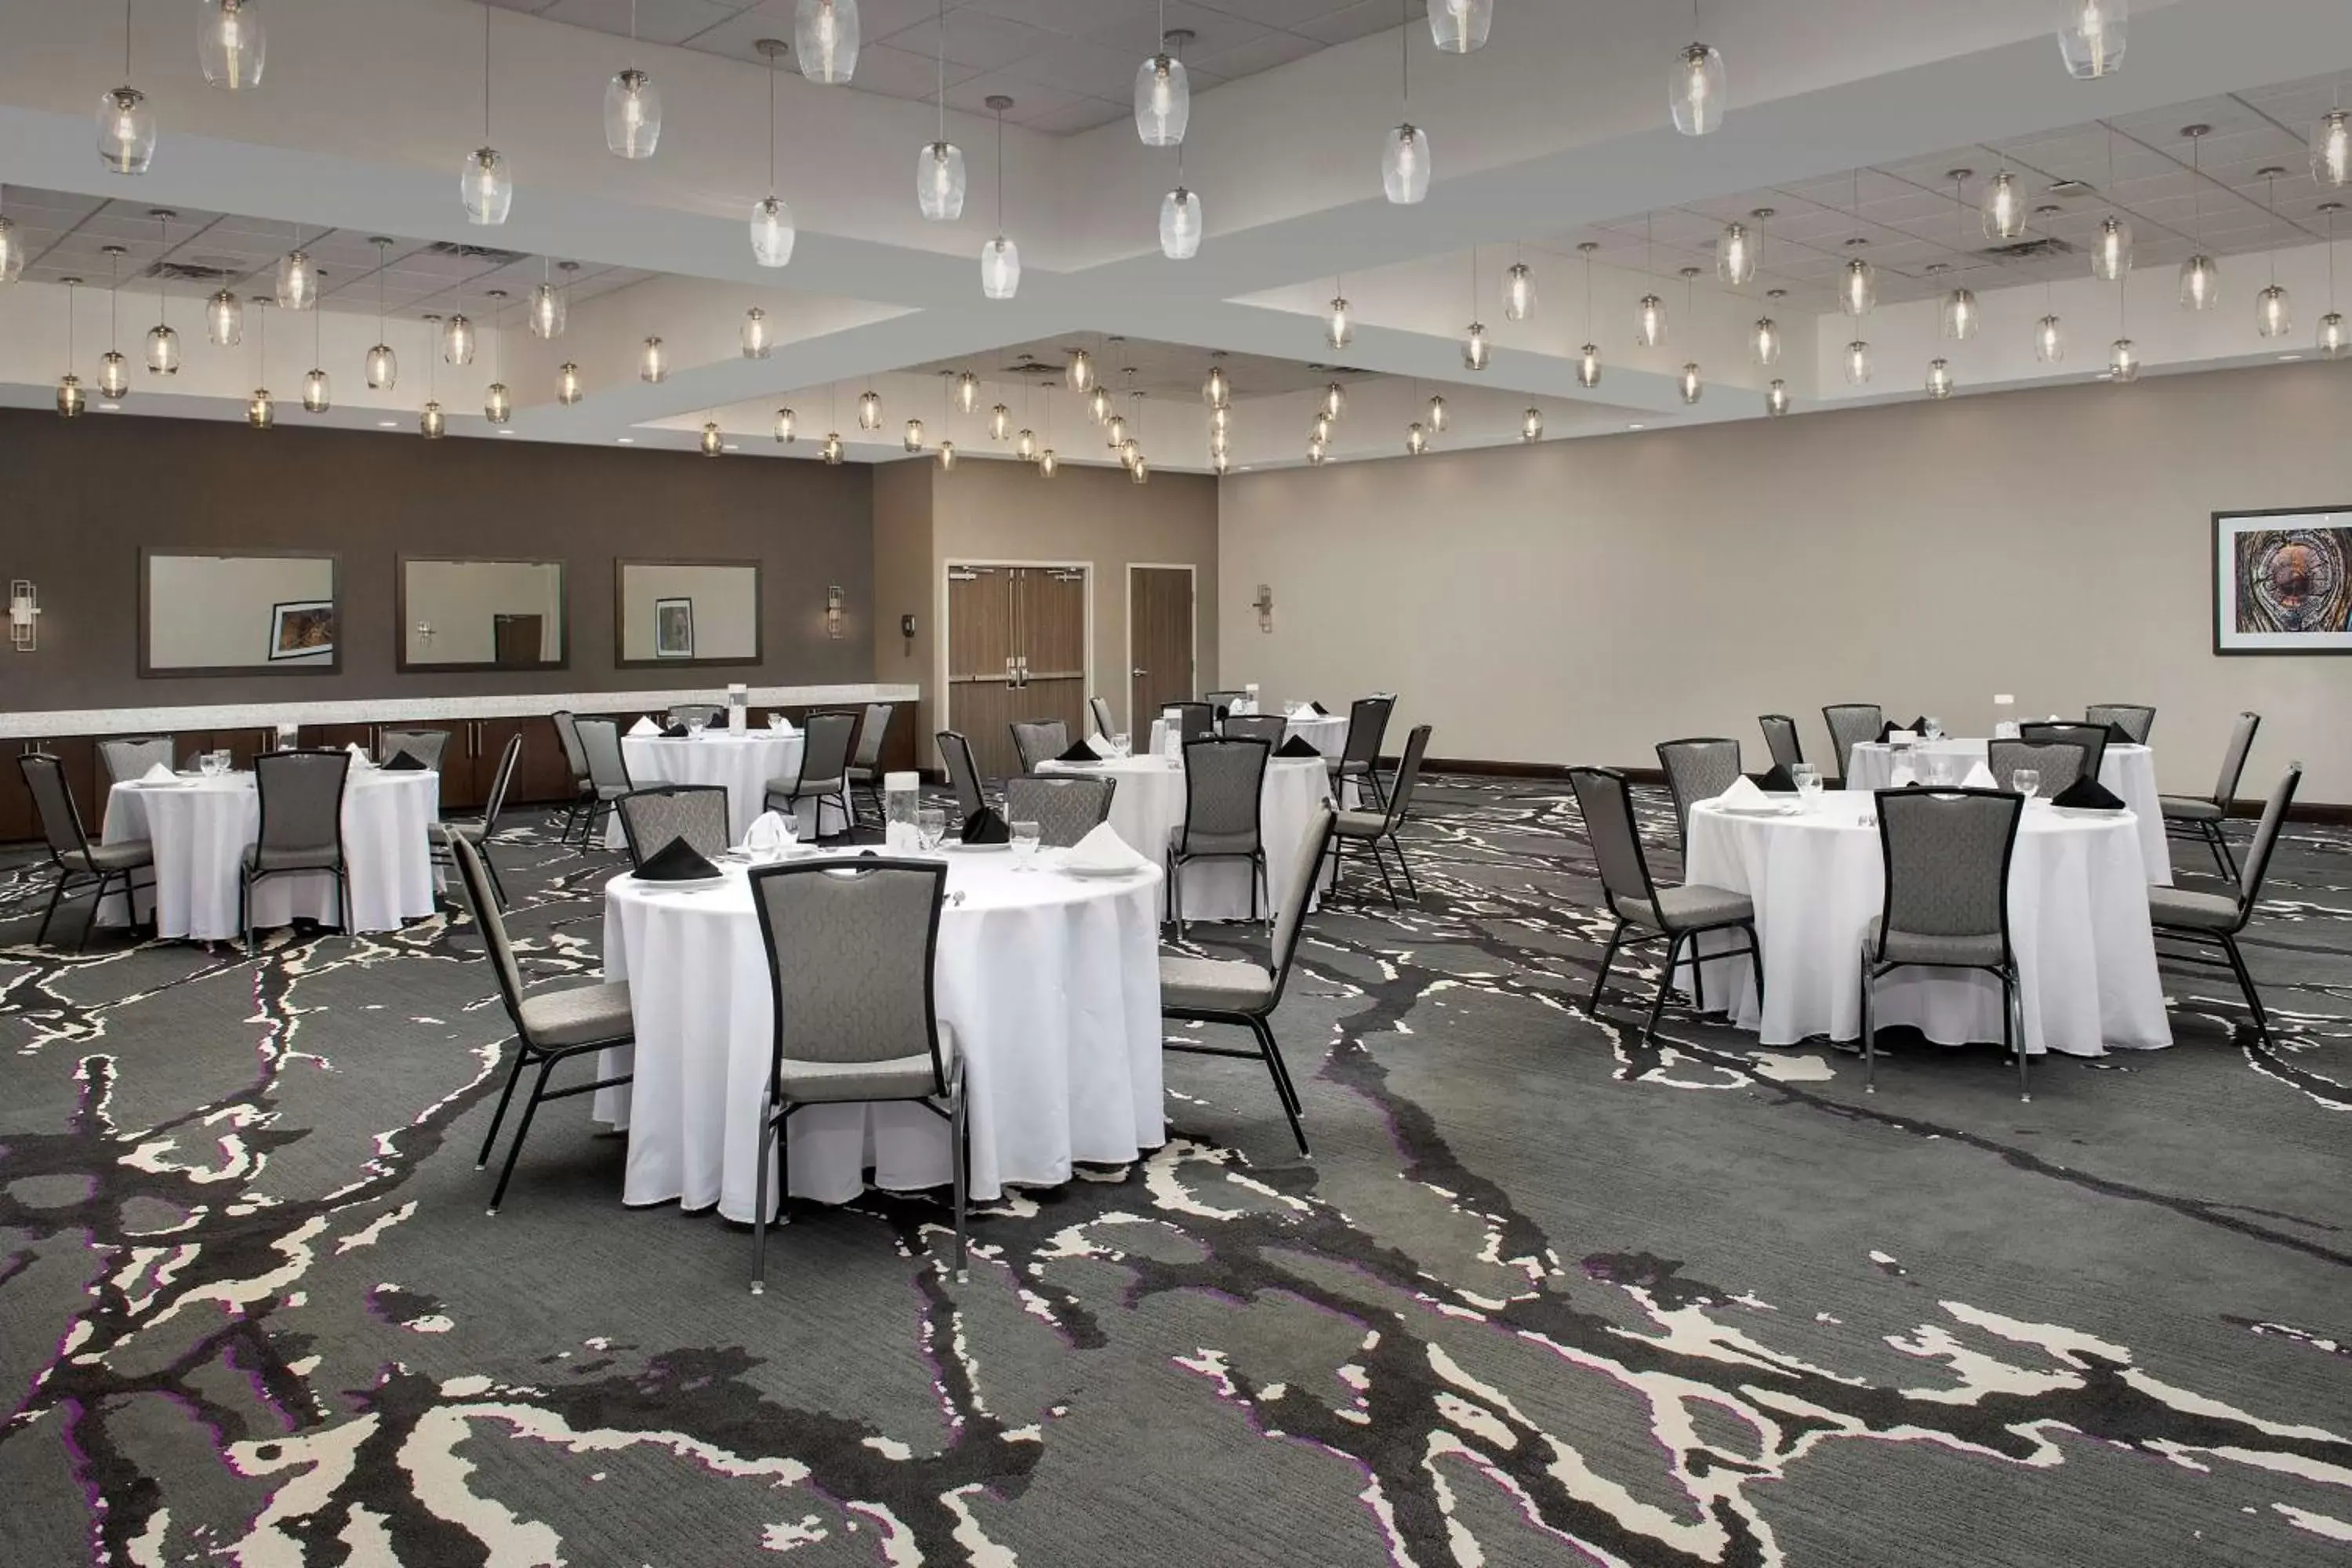 Meeting/conference room, Banquet Facilities in Hilton Garden Inn Columbia Airport, SC